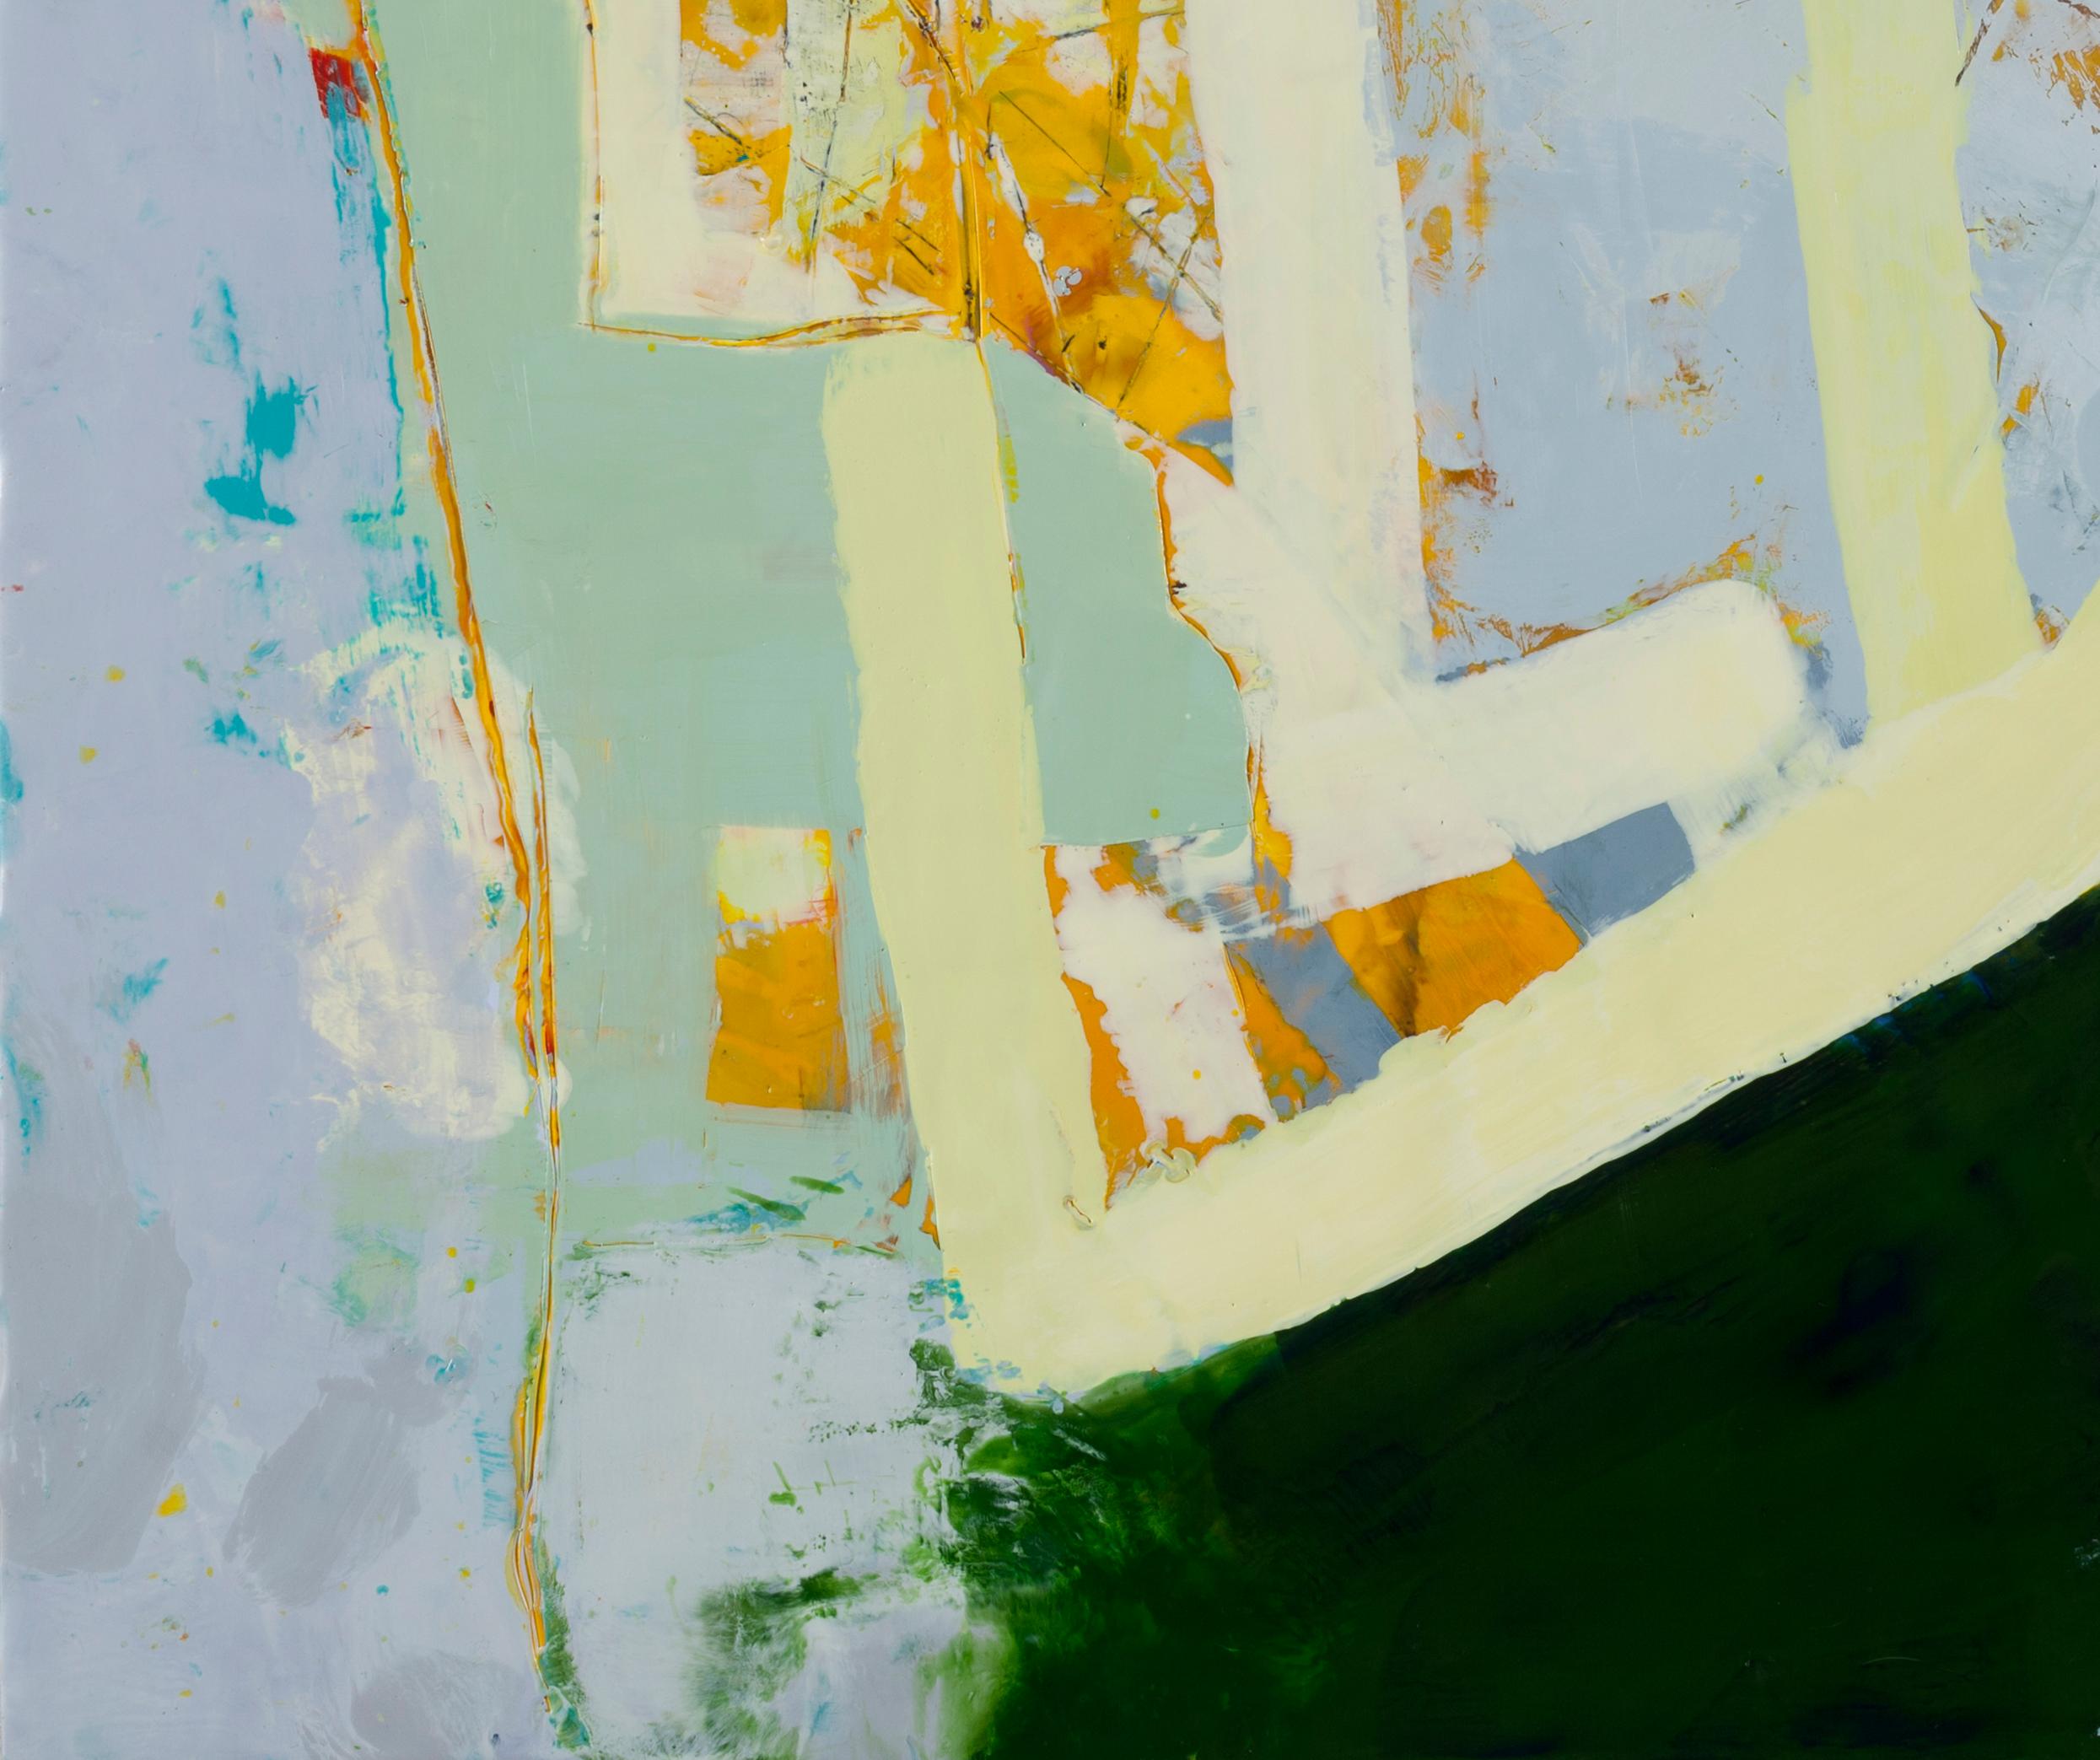 NYC Kind of Day, green and blue abstract encaustic work, 24 x 24 inches - Contemporary Painting by Lisa Pressman